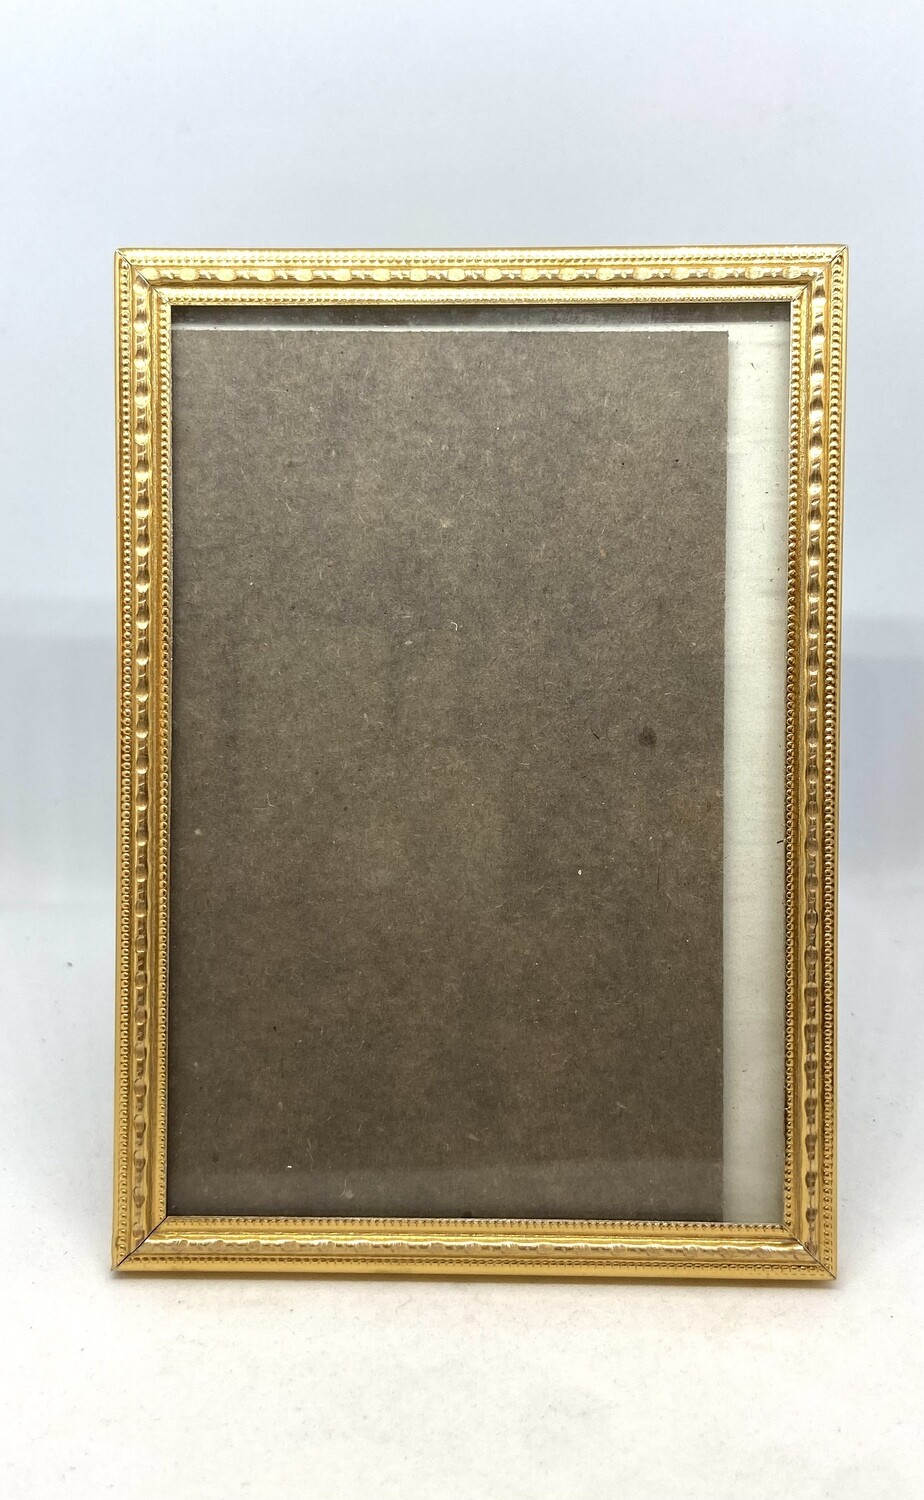 3.5" x 5" Brass Picture Frame